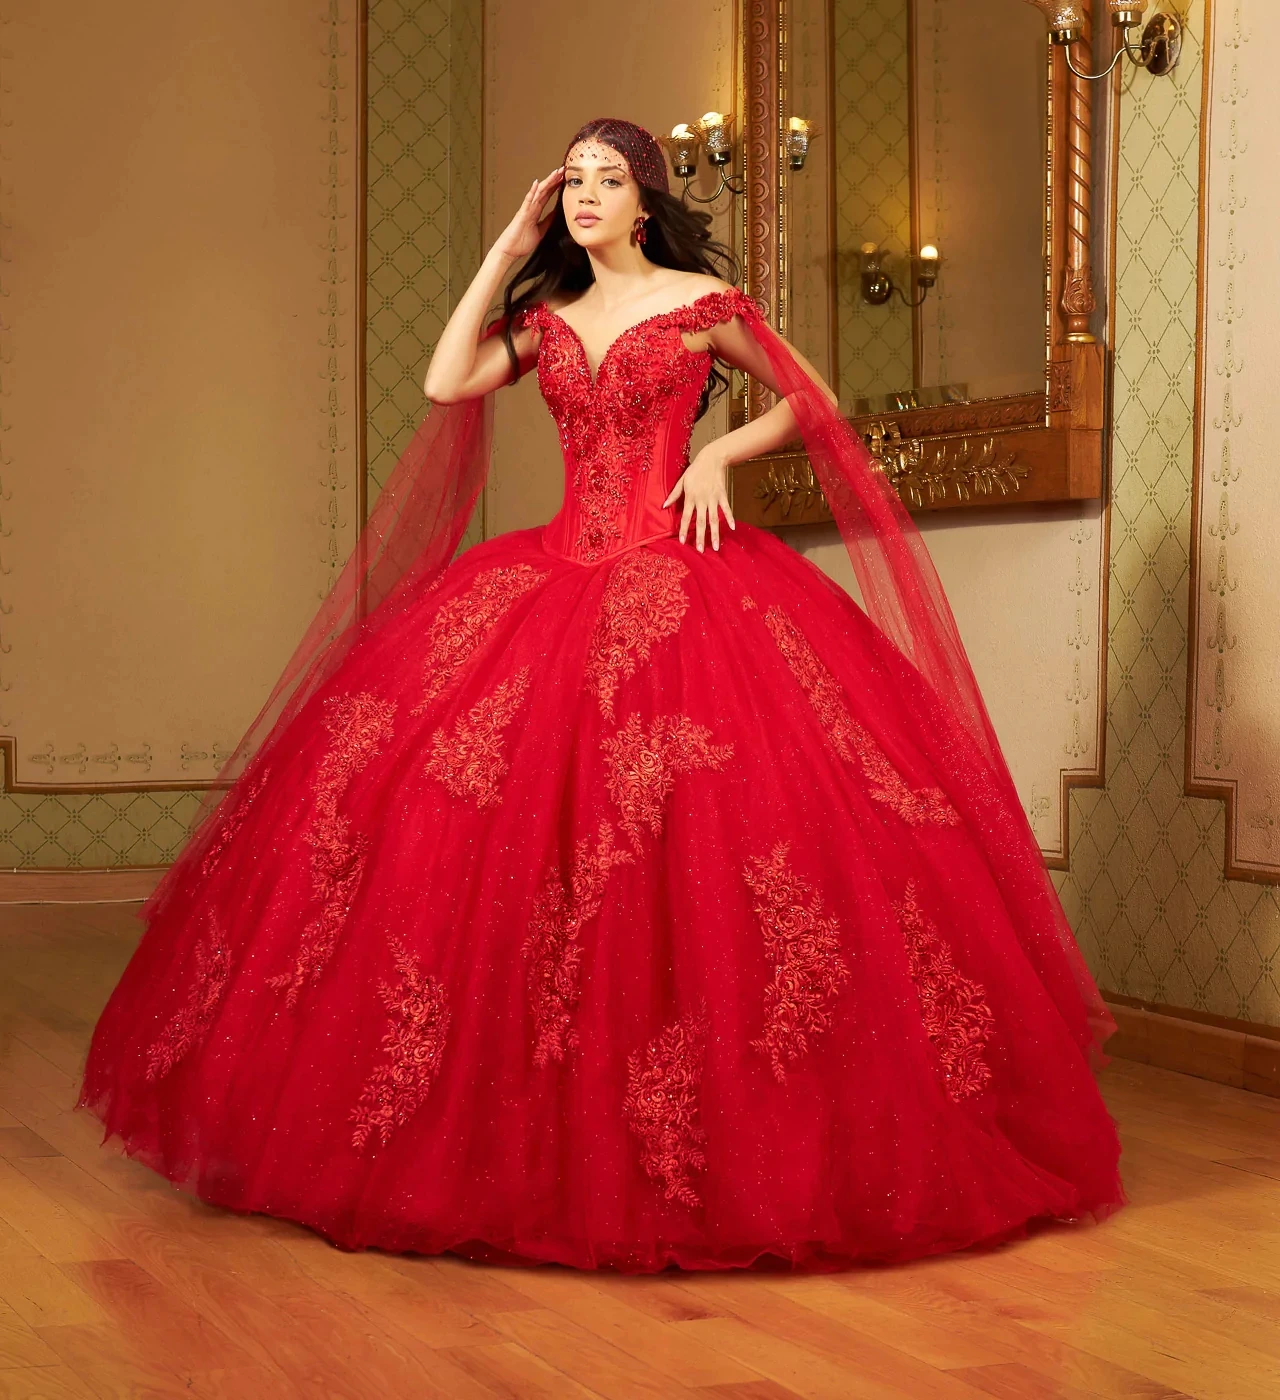 

Red Charro Quinceanera Dresses Ball Gown Deep V-neck Tulle Appliques Puffy Mexican Sweet 16 Dresses 15 Anos